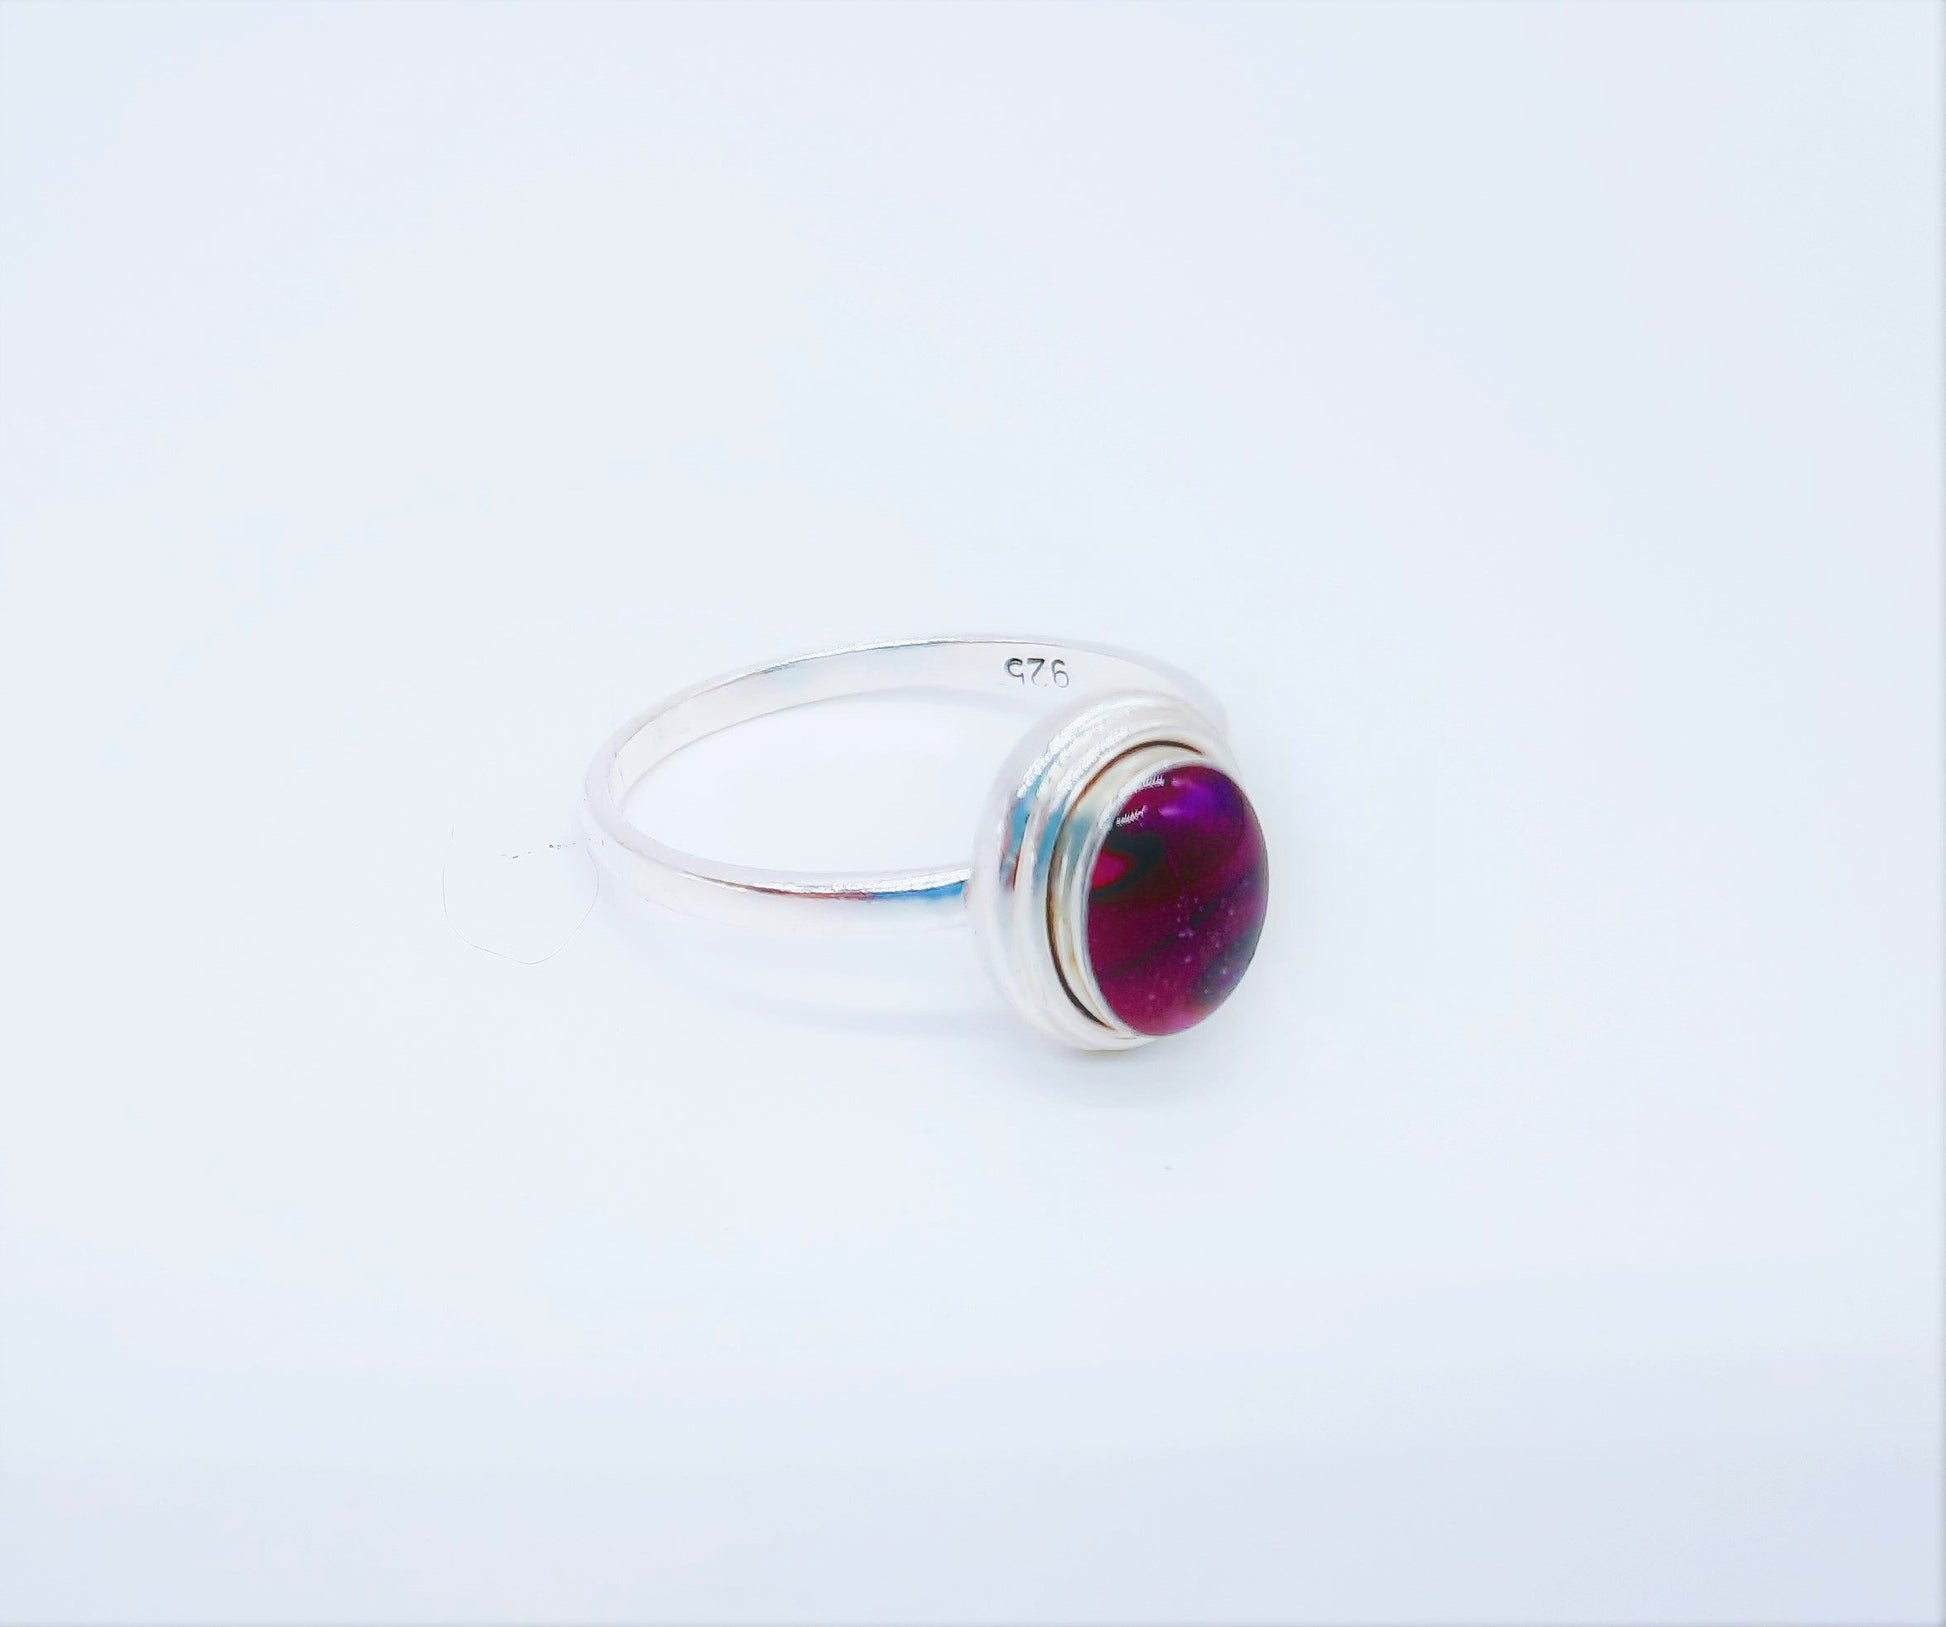 Handmade / Handcrafted 925 Sterling Silver Purple Pink Abalone / Paua Seashell Ring, Oval, Sealed with Holographic Mica Infused Resin